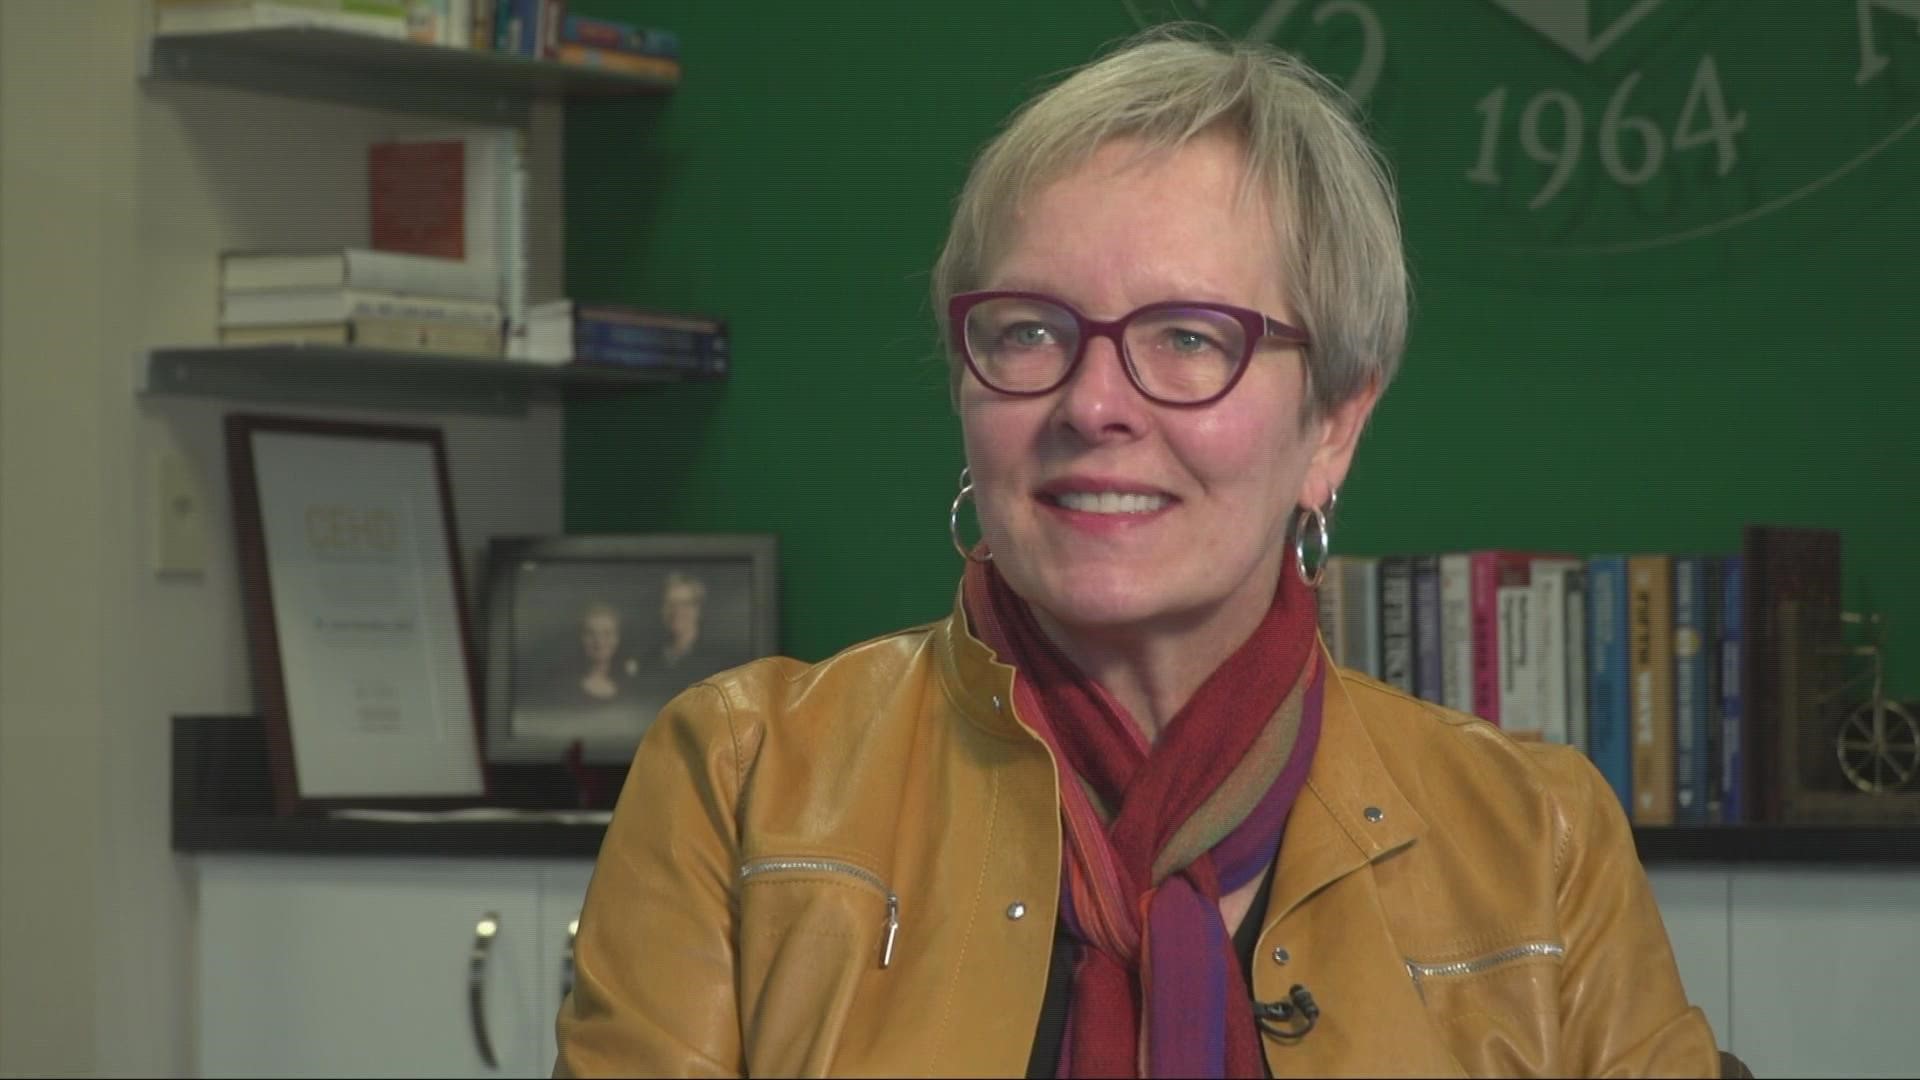 We talk with Dr. Laura Bloomberg about her role as president of Cleveland State University.